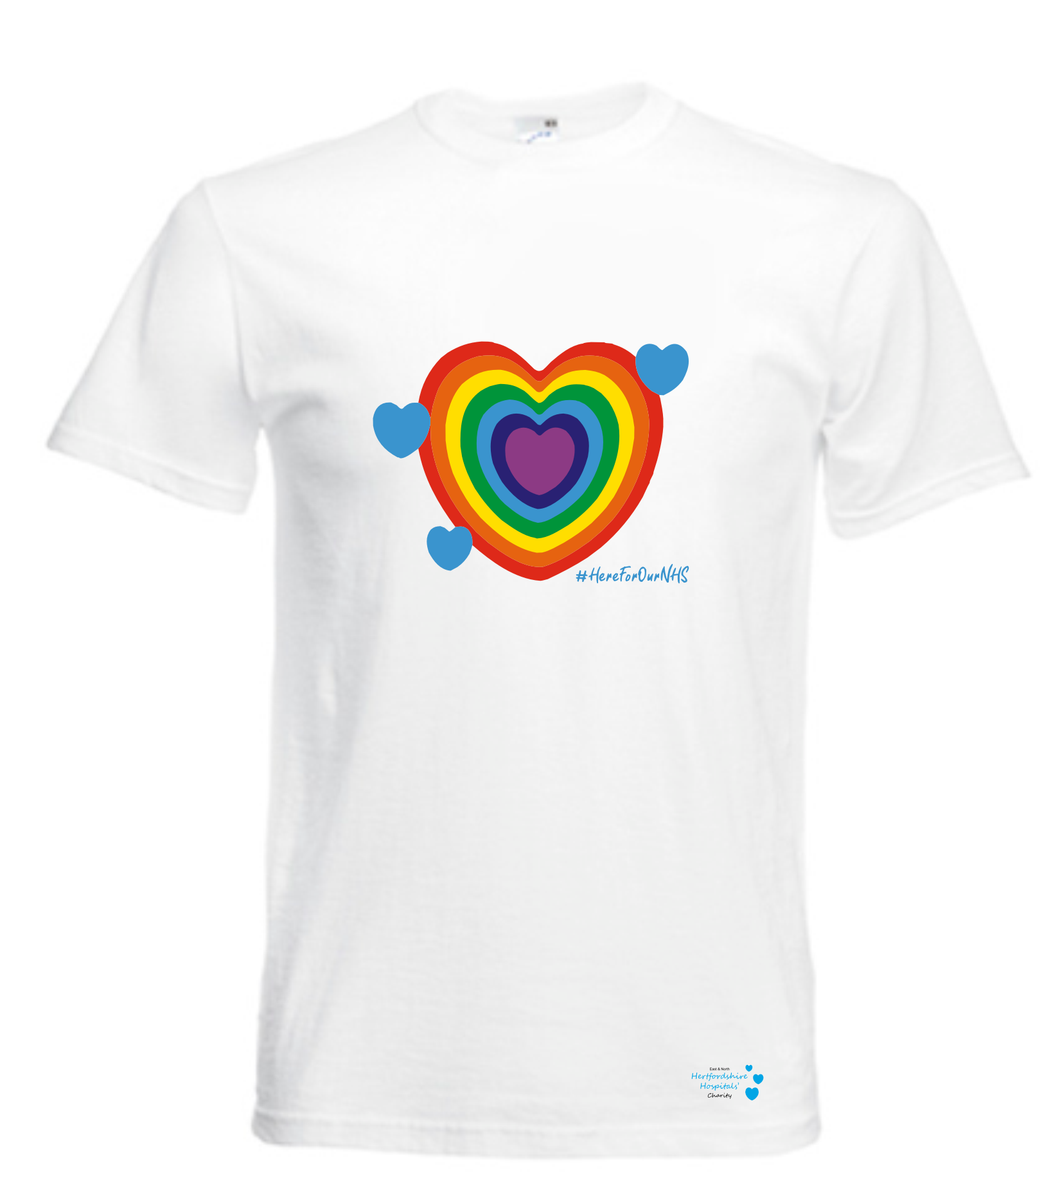 East and North Hertfordshire Hospitals Charity unisex t-shirt